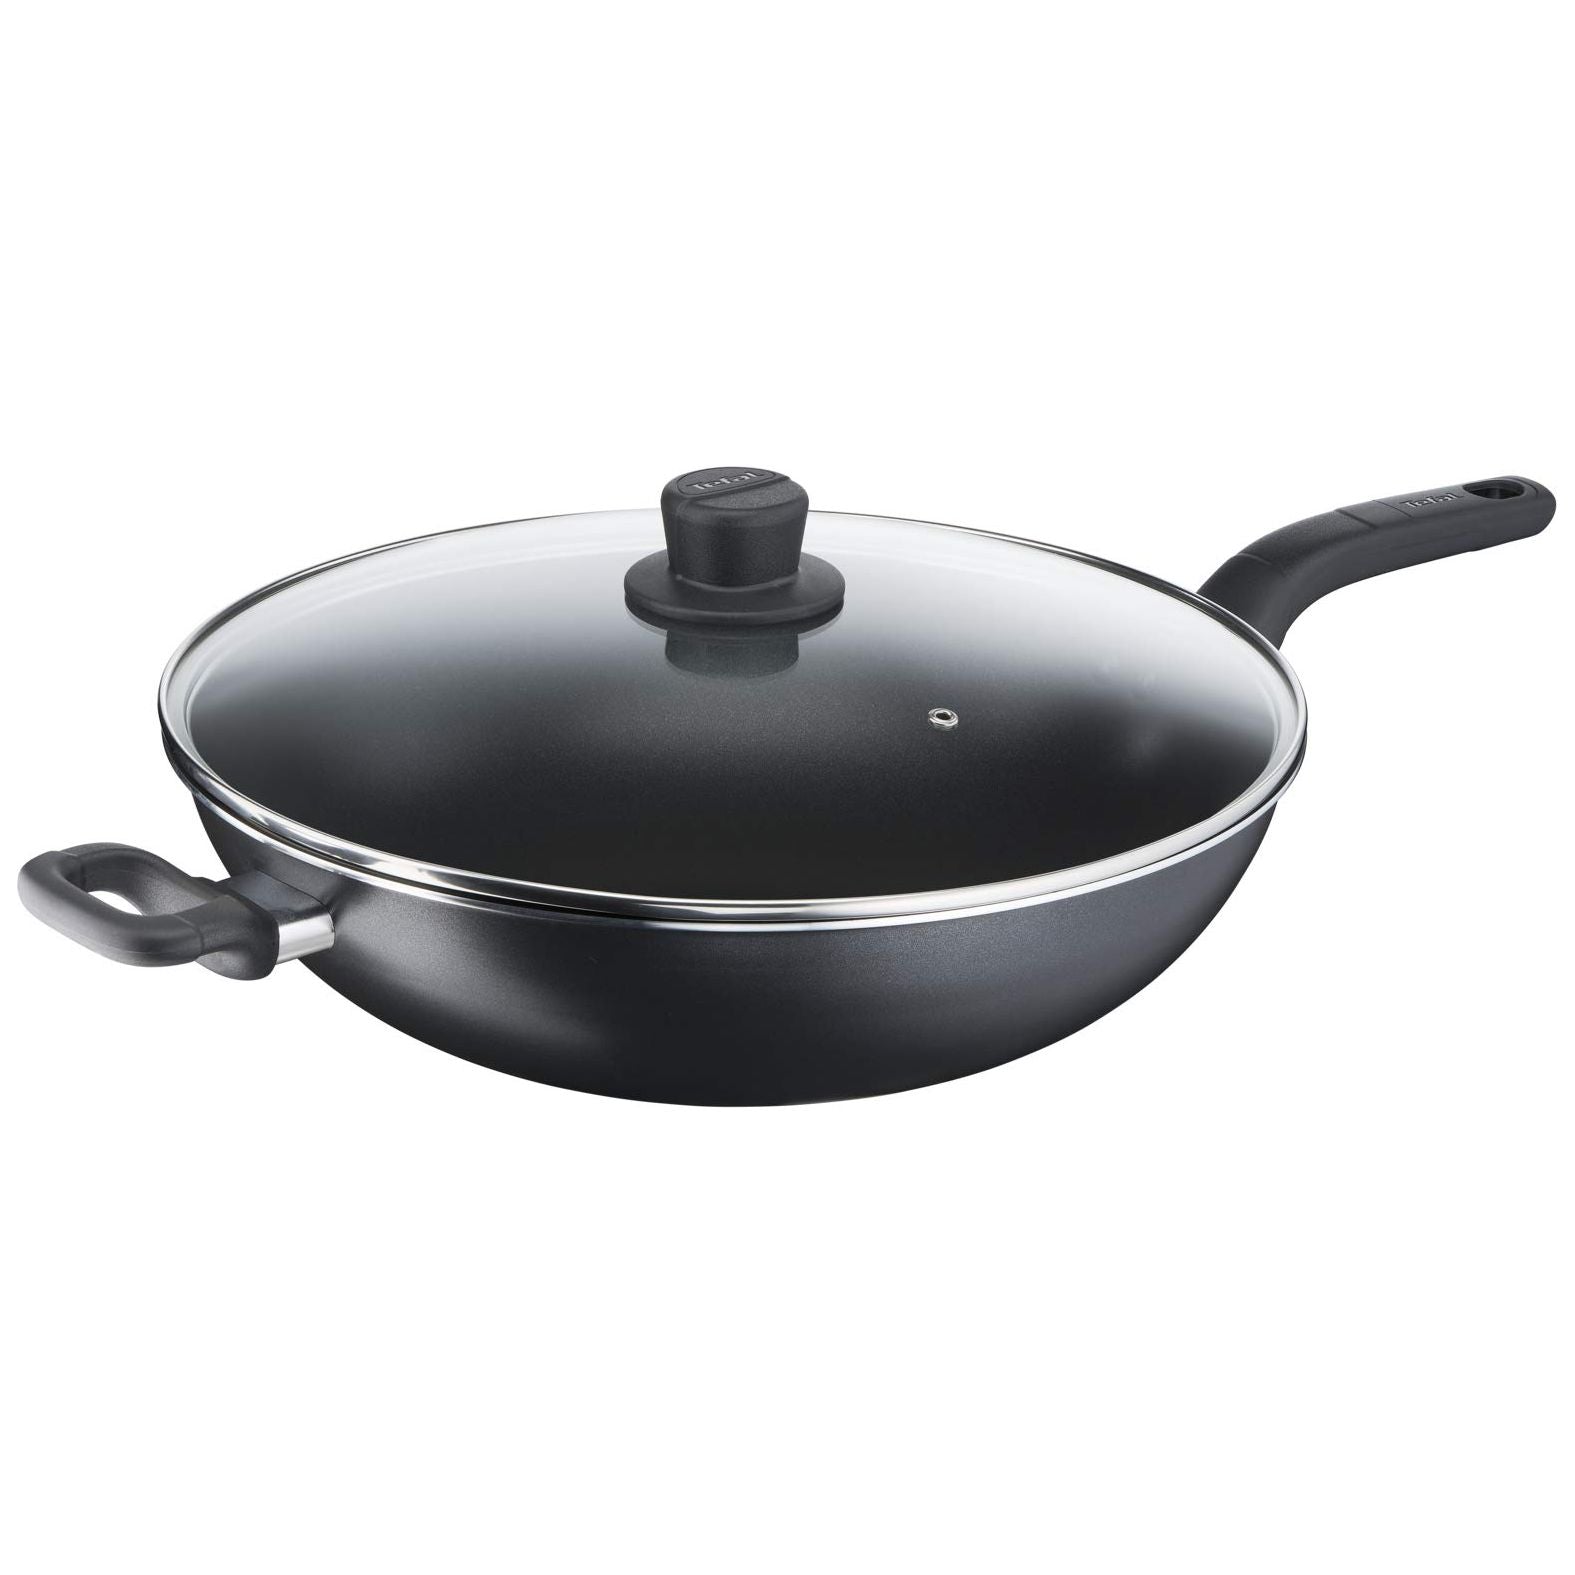 Cook Easy Wok Pan 36 Cm with Cover  مقلى عميق مع غطاء 36 سم